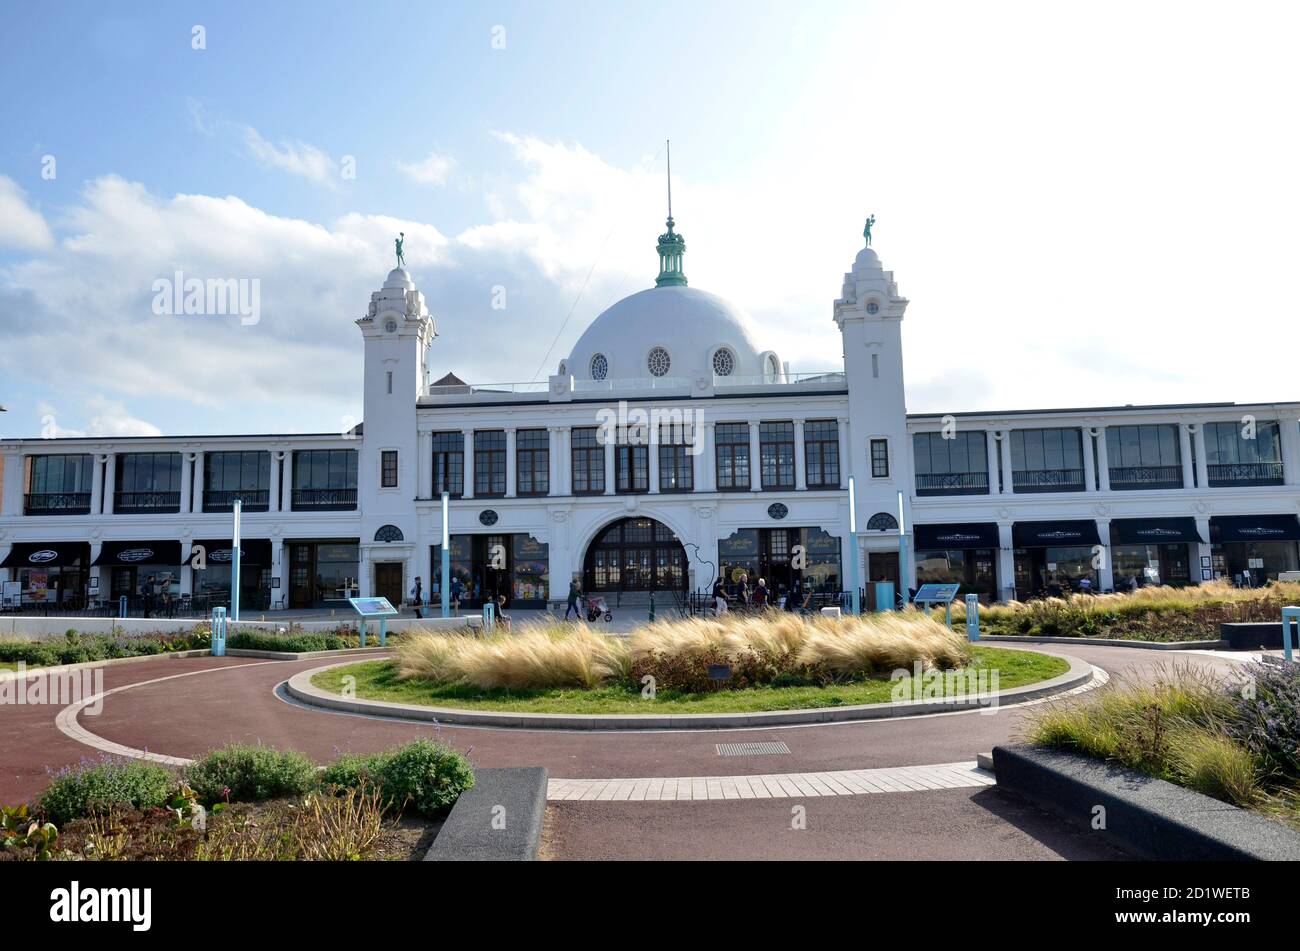 The Spanish City leisure complex in Whitley Bay, re-opened and revamped after years of dereliction in2018 Stock Photo